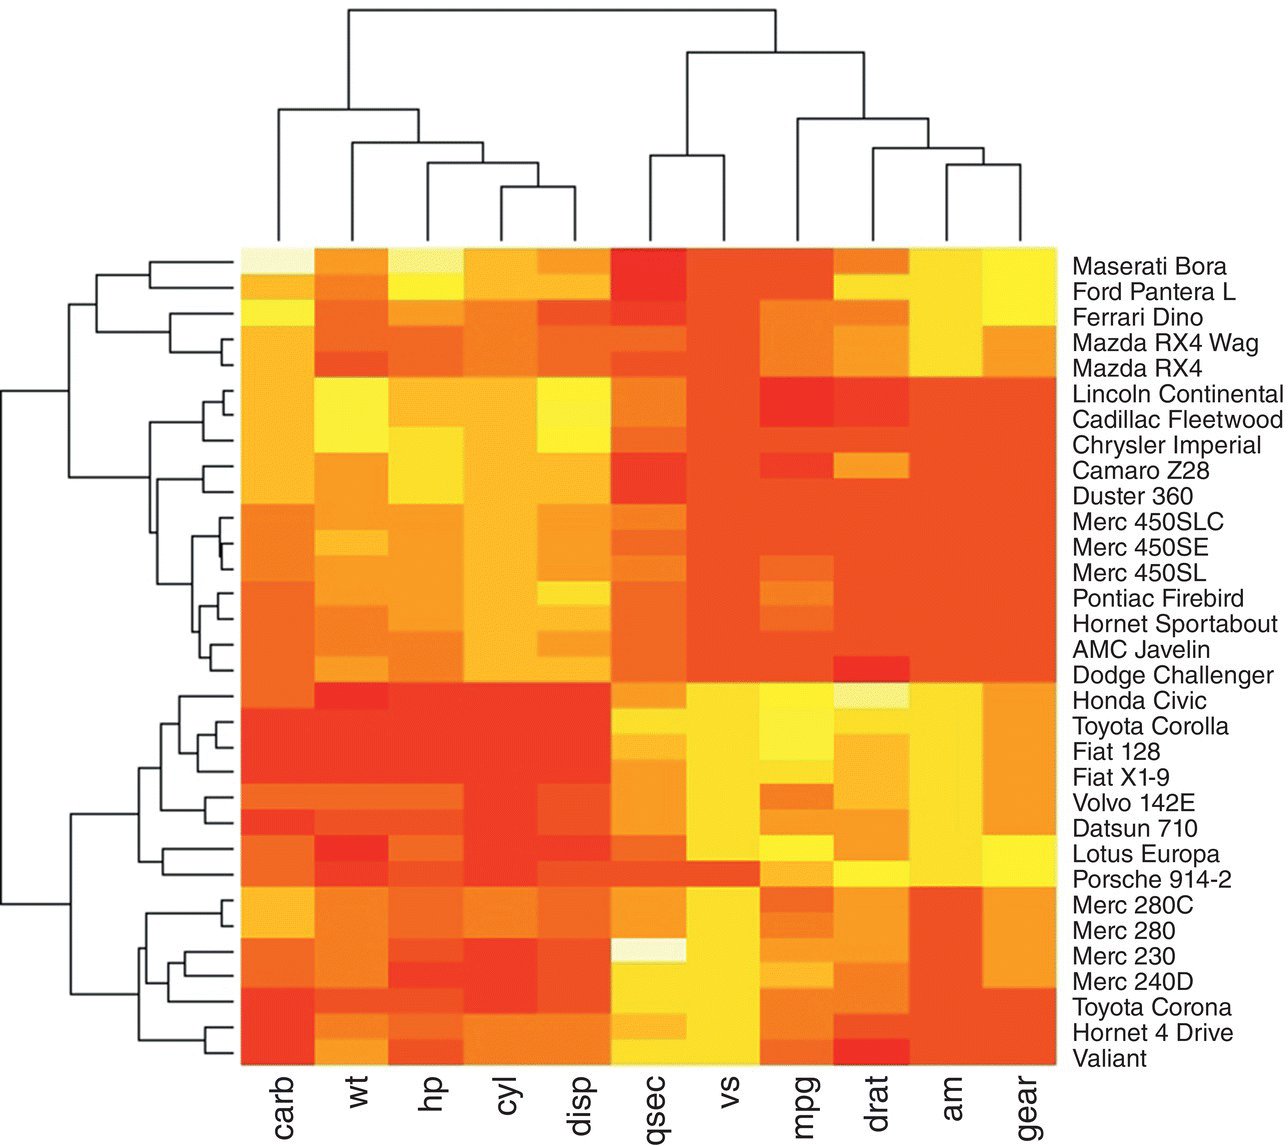 Heatmap in R displaying columns for “carb,” “wt,” “hp,” “cyl,” “disp,” “qsec,” “vs,” “mpg,” “drat,” “am,” and “gear” and rows for Maserati Bora, Ford Pantera L, Ferrari Dino, Mazda RX4 Wag, Mazda RX4, etc.